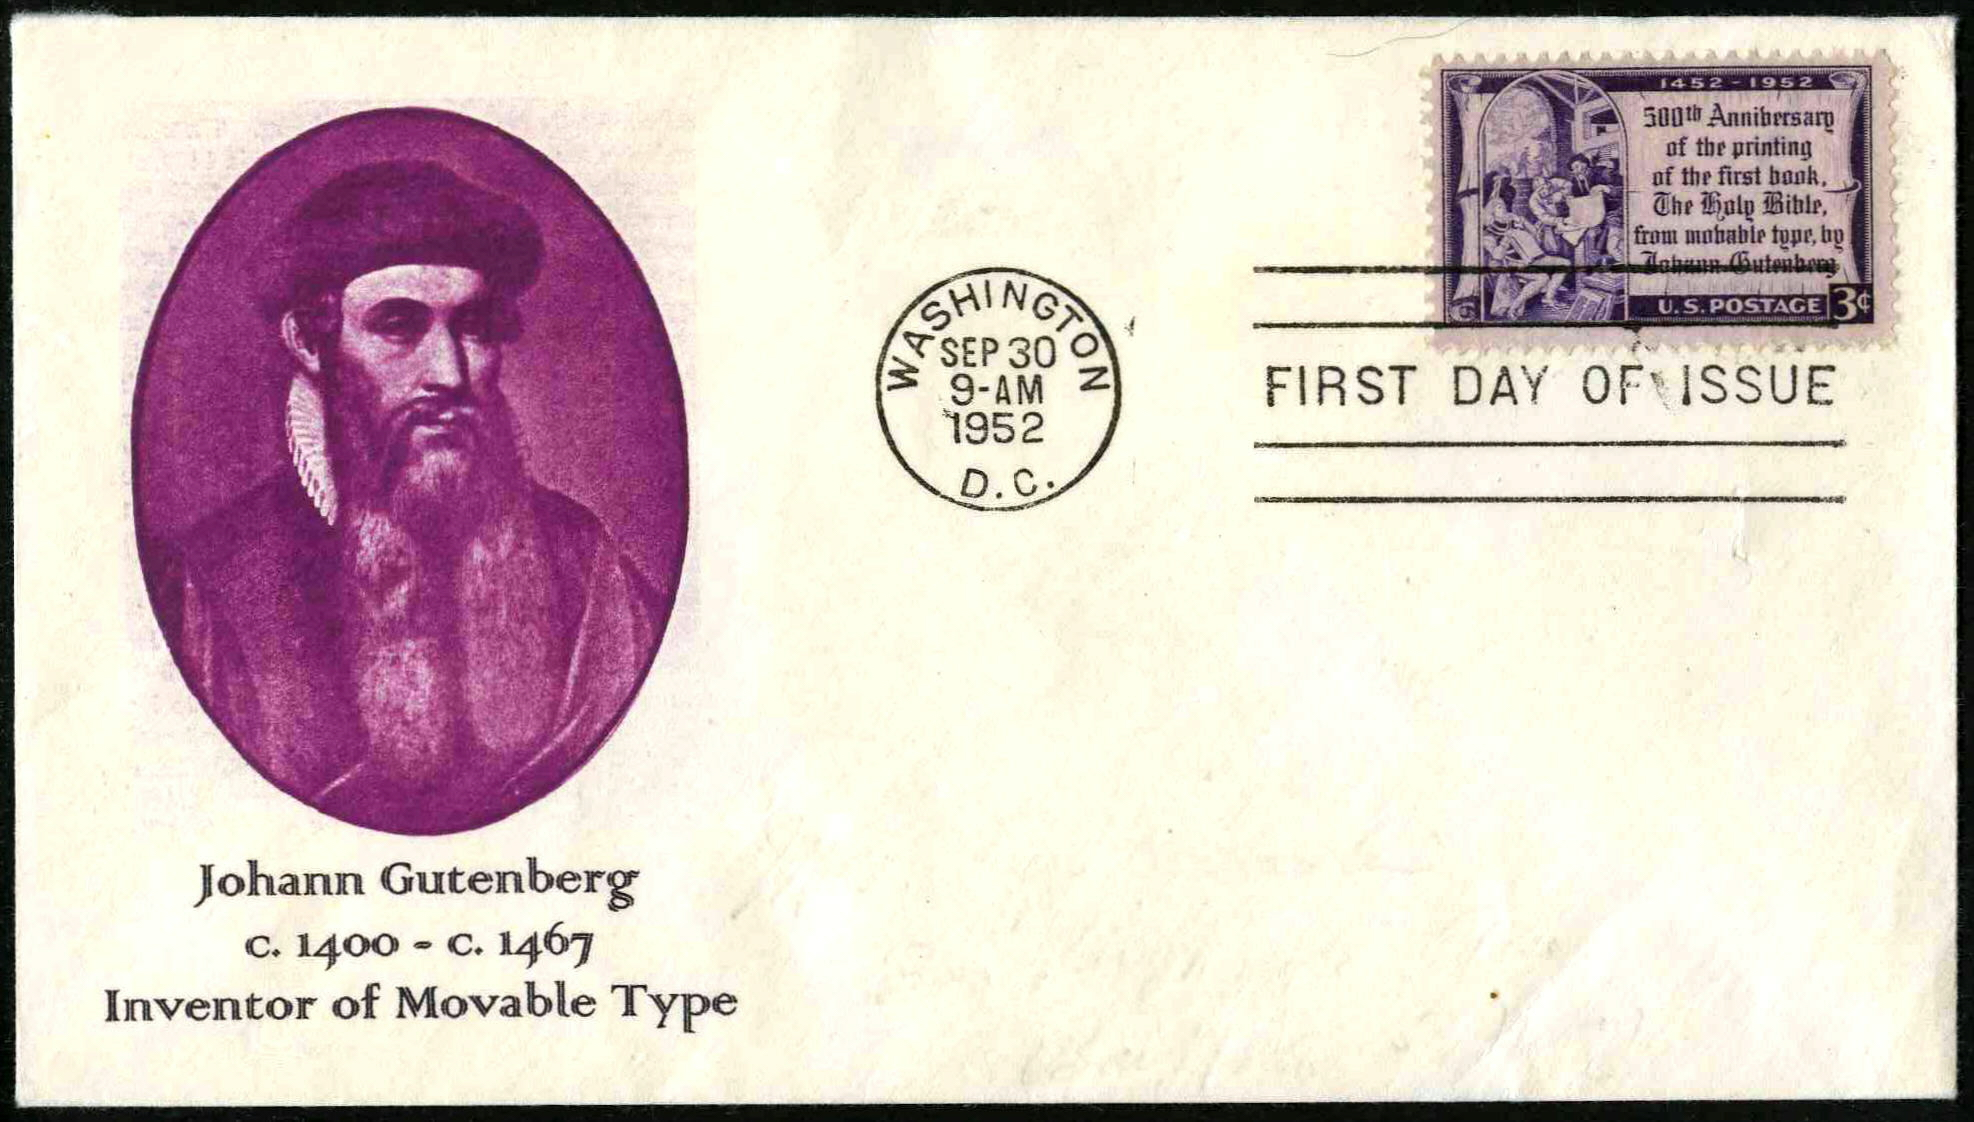 United States, Scott #1014, on First Day Covers